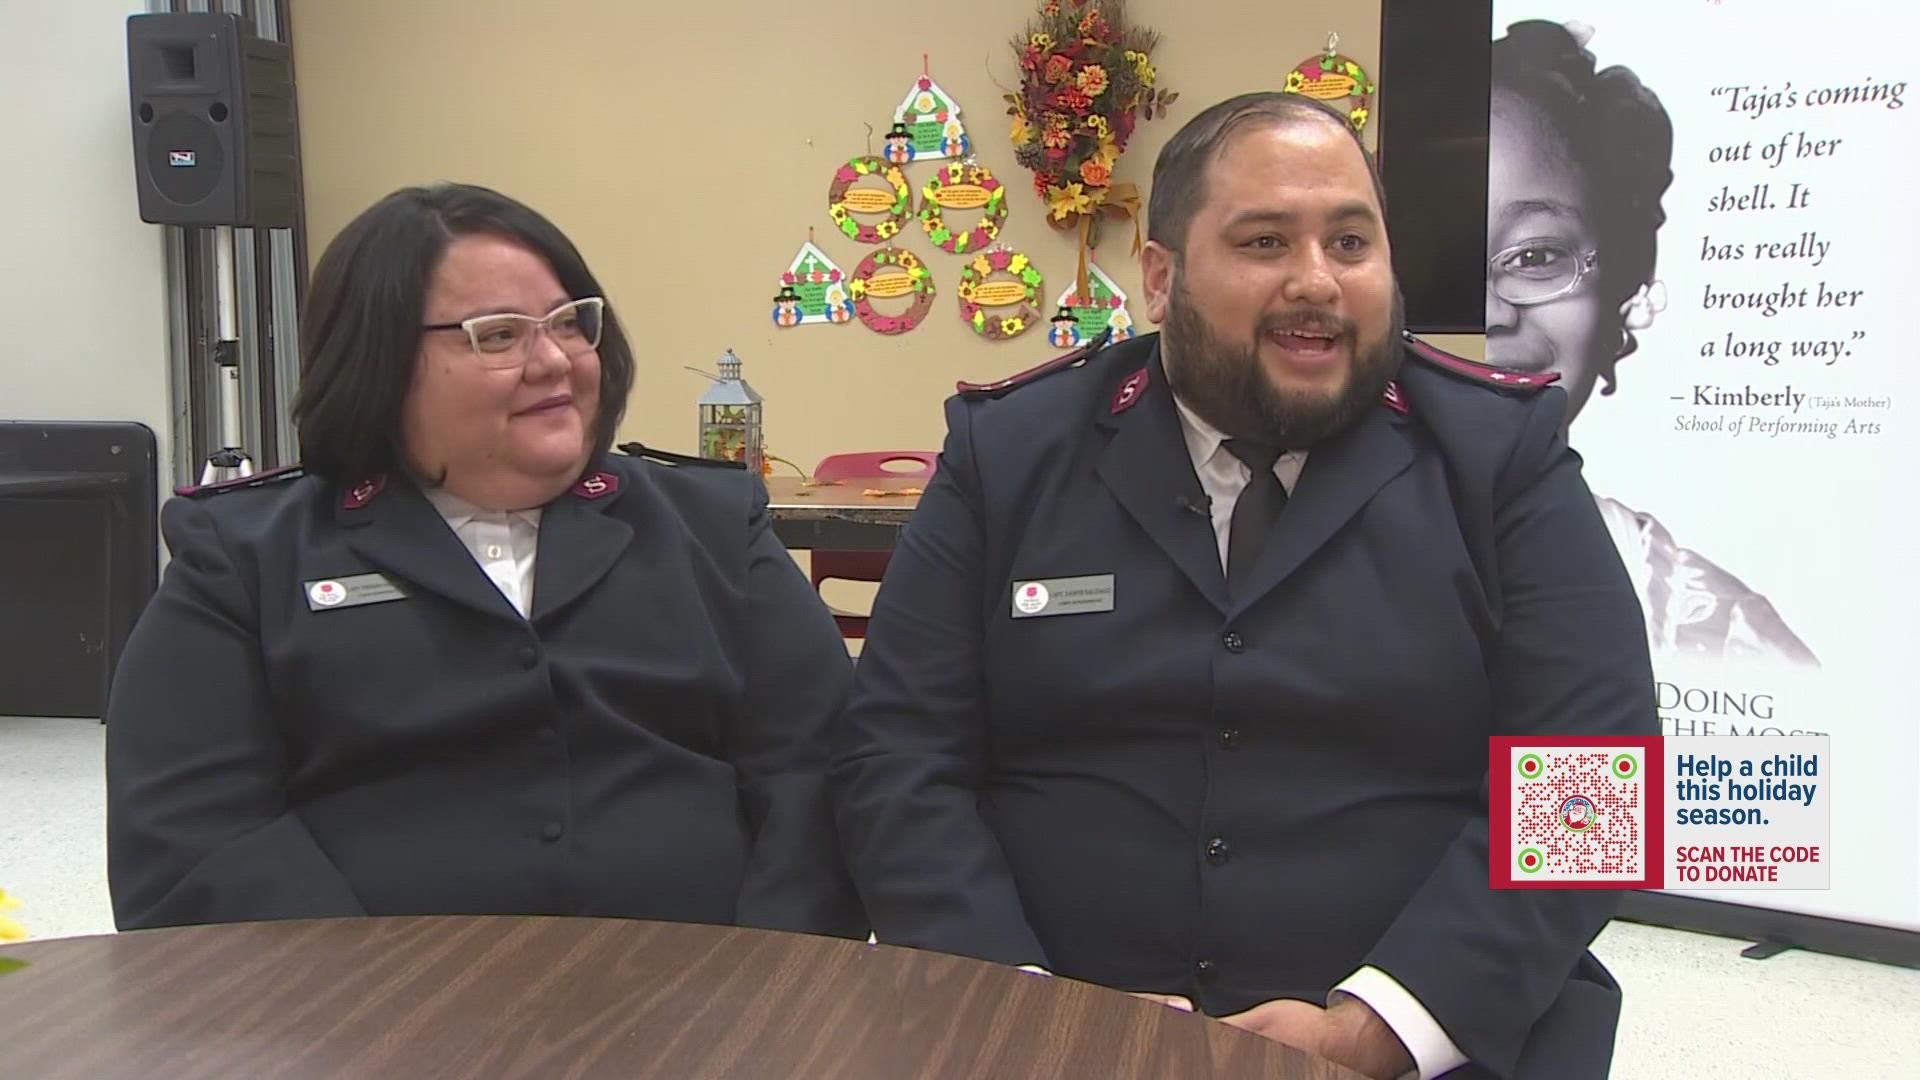 The Salvation Army's Angel Tree Program helps children in need every holiday season. One couple, who were once recipients, has decided to give back.